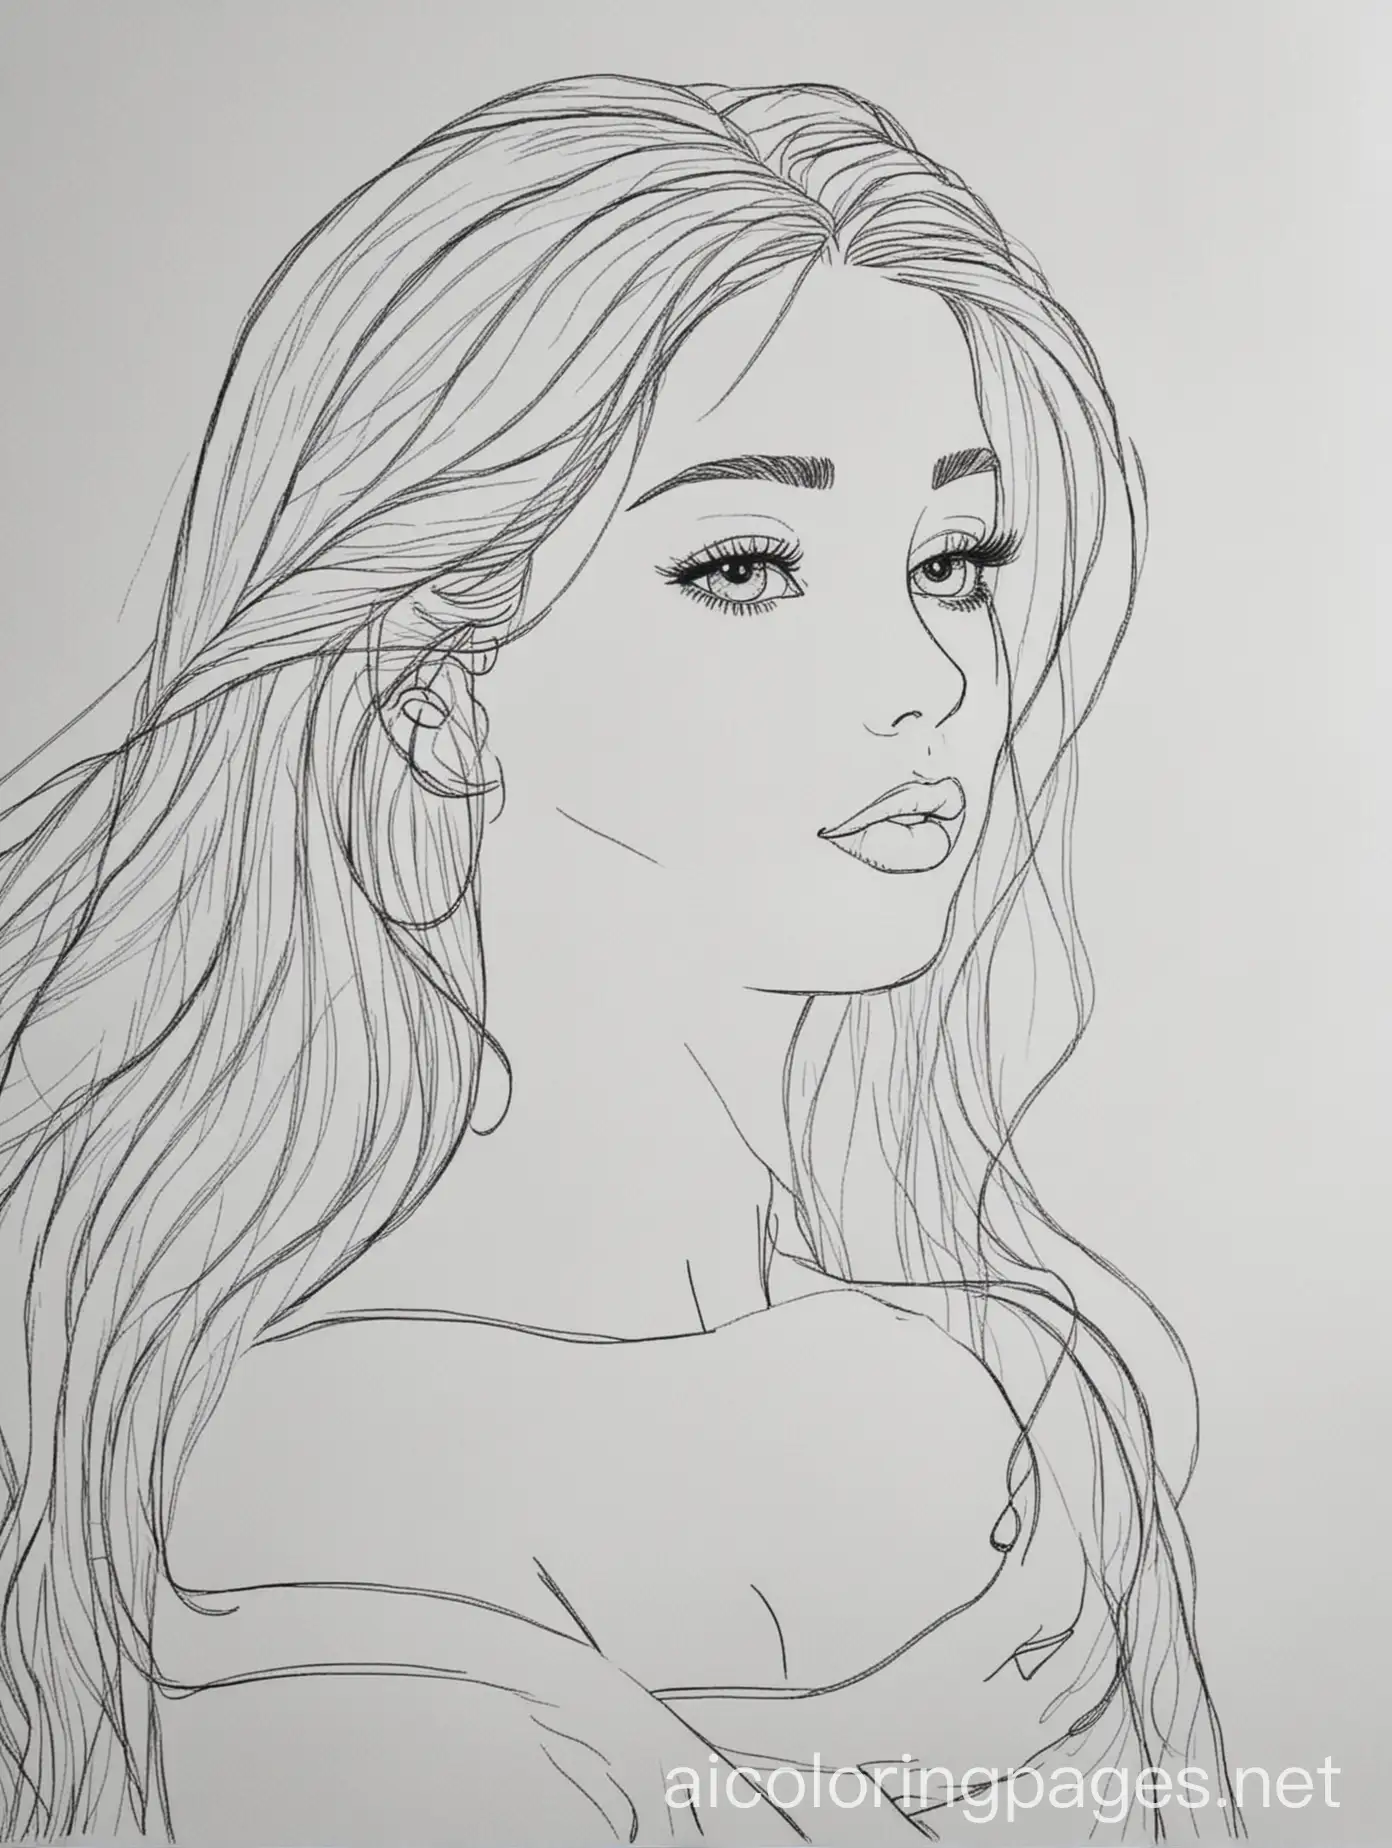 woman love , Coloring Page, black and white, line art, white background, Simplicity, Ample White Space. The background of the coloring page is plain white to make it easy for young children to color within the lines. The outlines of all the subjects are easy to distinguish, making it simple for kids to color without too much difficulty